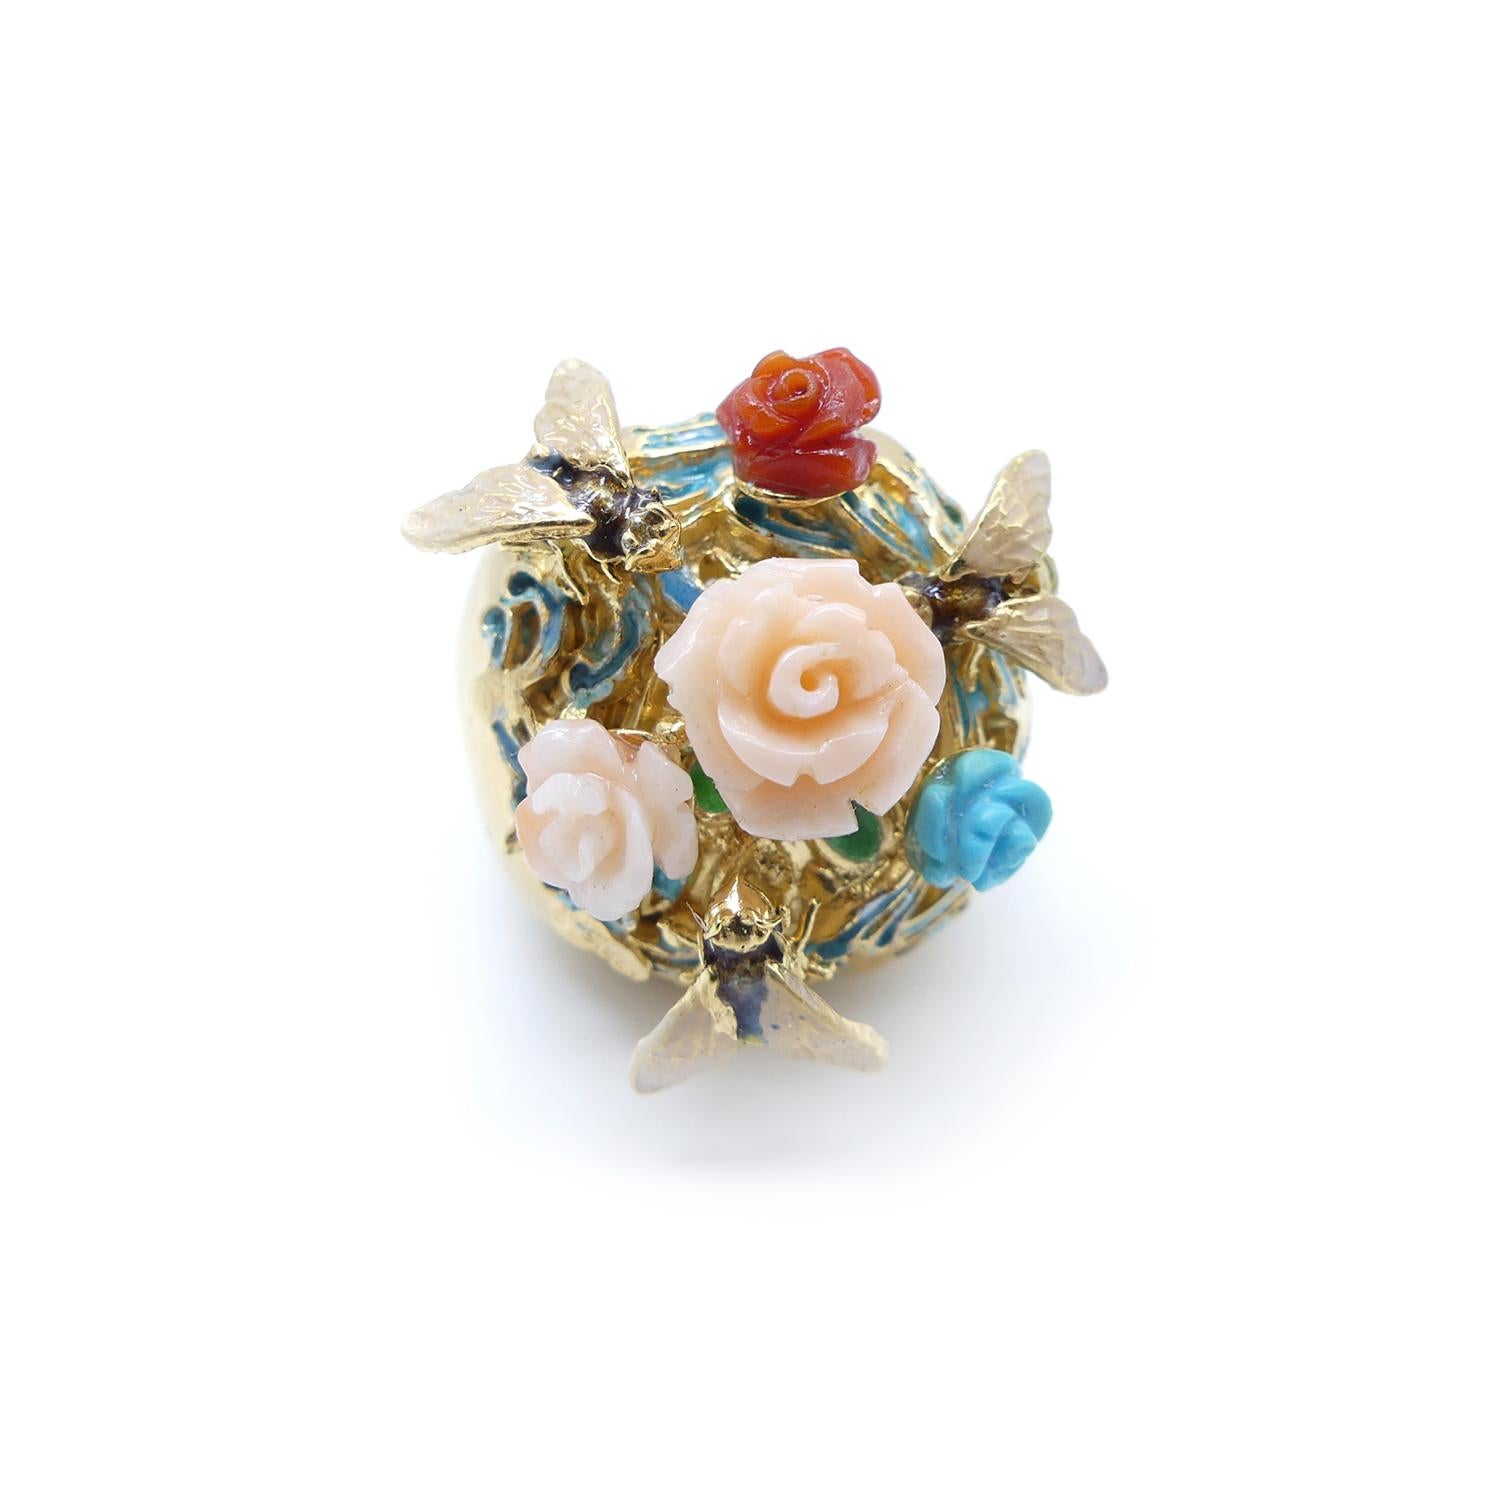 Gold plated ring with coral angel skin, blue turquoise and red coral carved as a roses of different sizes like a garden enameled with bees.

This precious ring belongs to the 